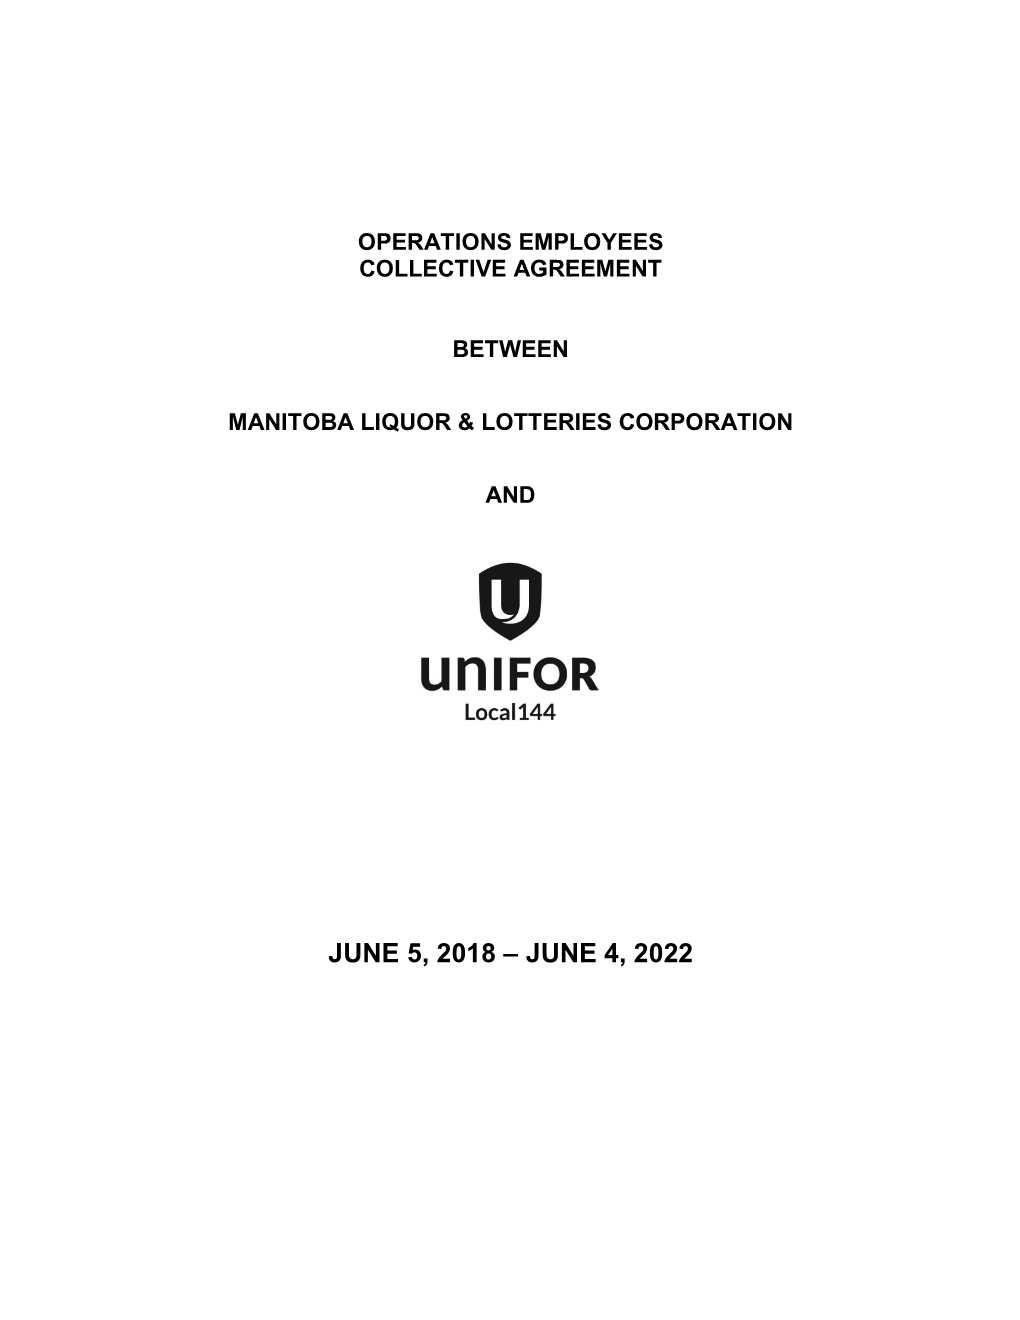 Operations Employees Collective Agreement Between Manitoba Liquor & Lotteries Corporation